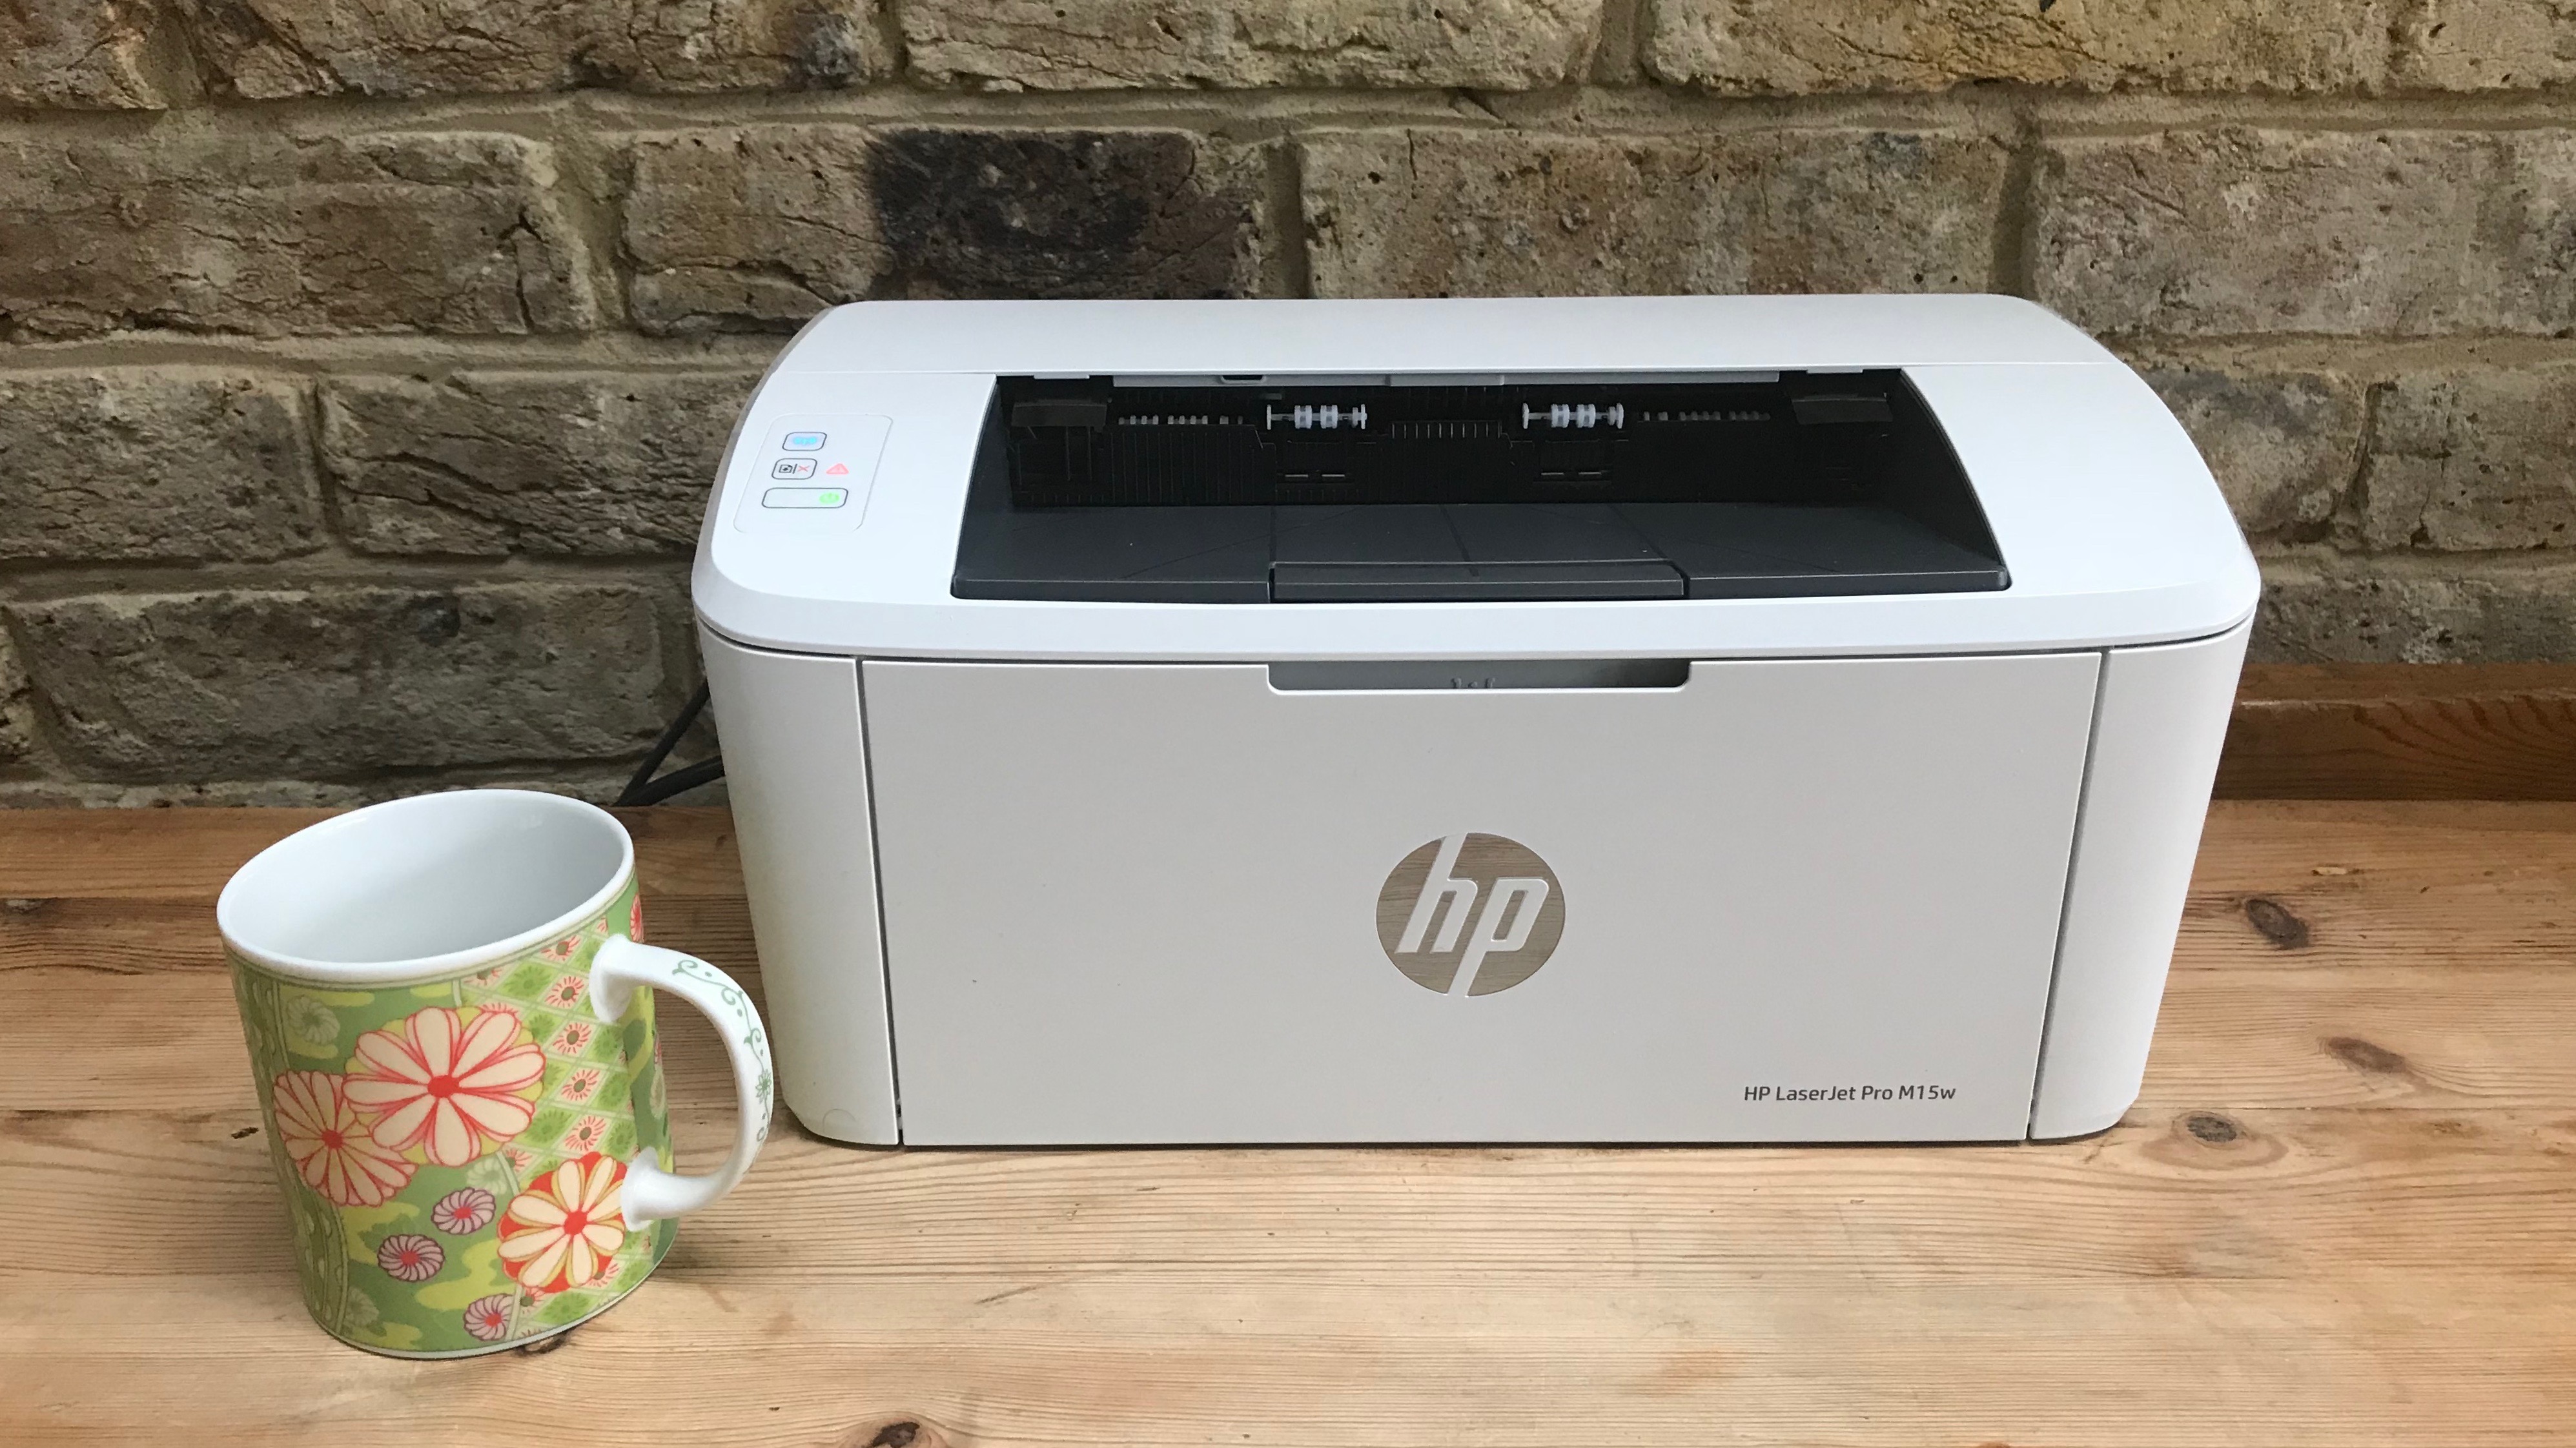 Best Hp Printers 2021 Best HP printers of 2020: Portable, laser, all in one, inkjet and 